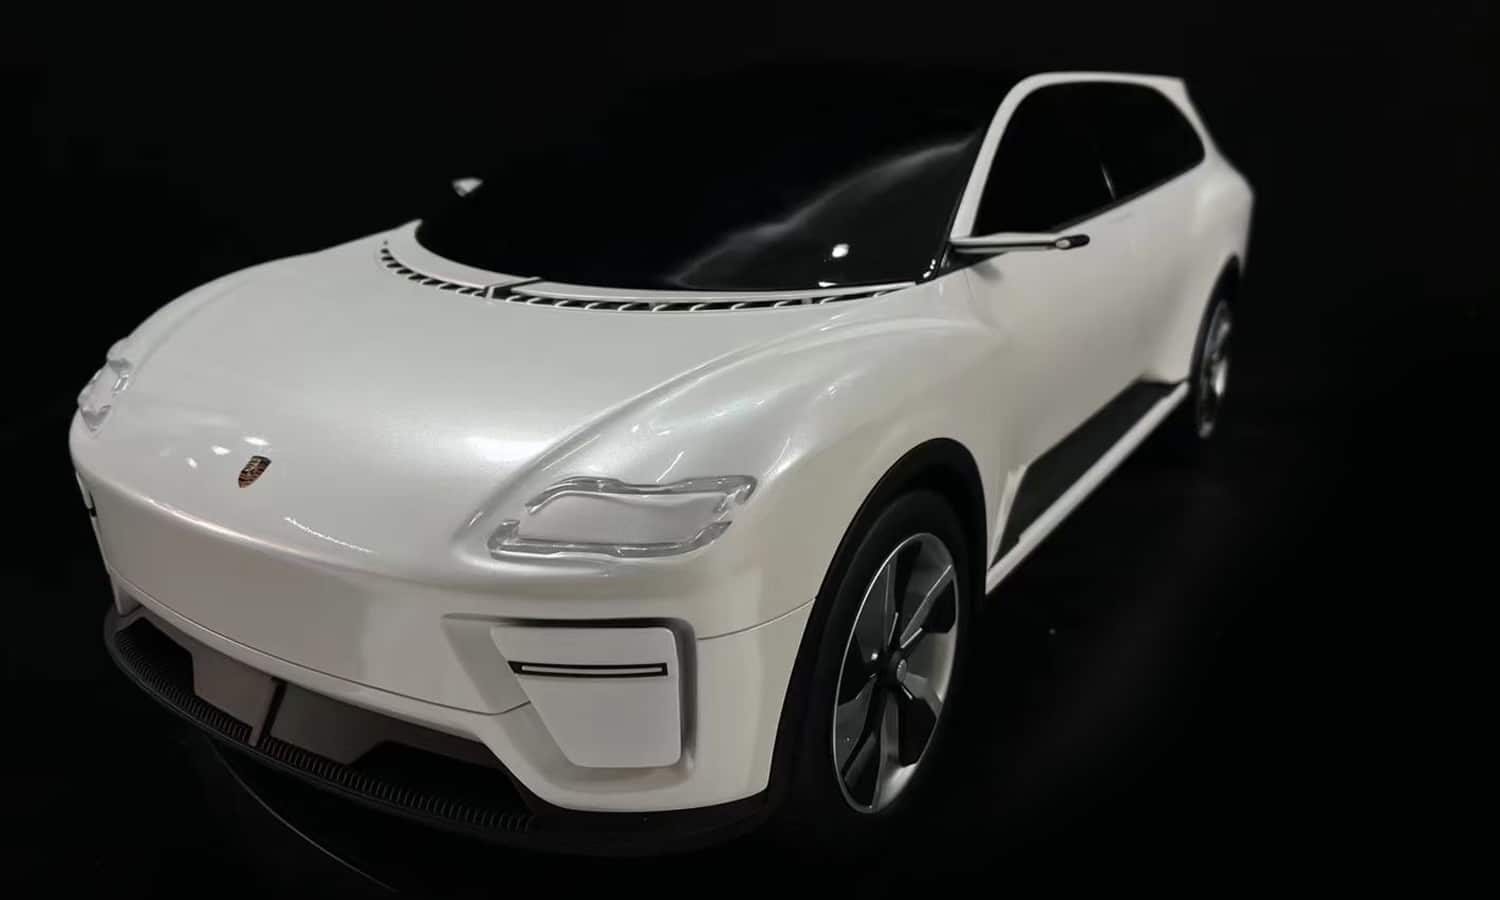 This Porsche Taycan scale-down model was constructed using a 3D